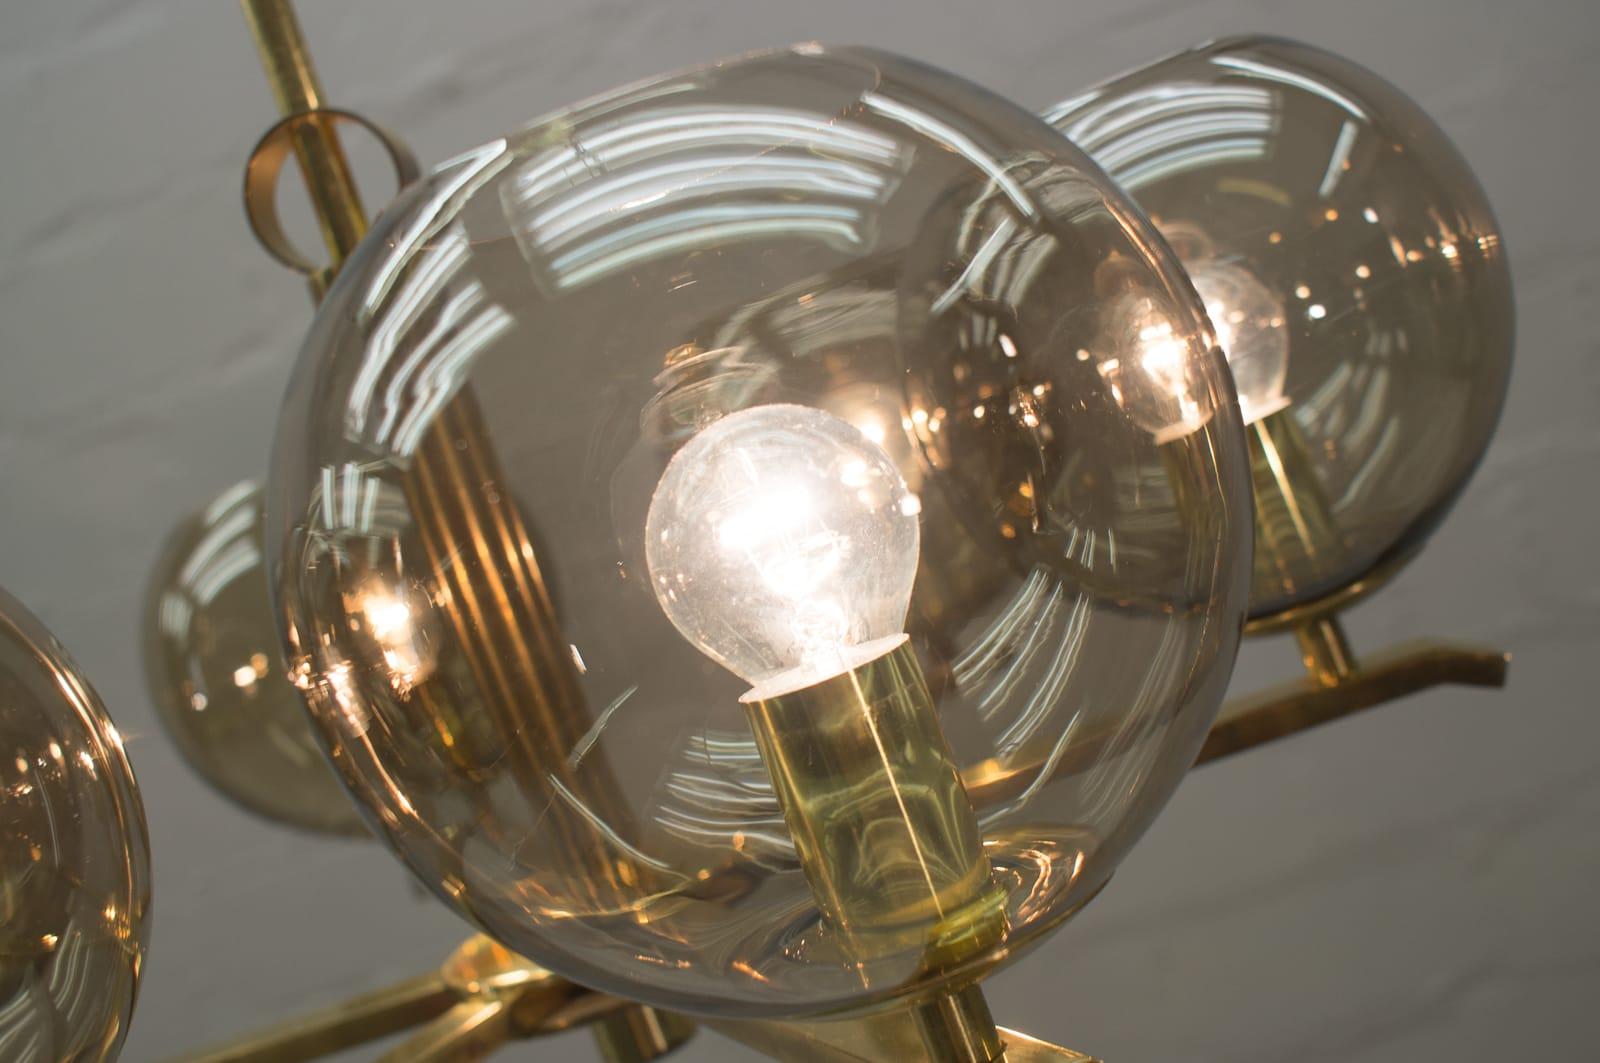 Elegant 1960s Brass Ceiling Lamp with 8 Smoked Glass Globes, Germany For Sale 7